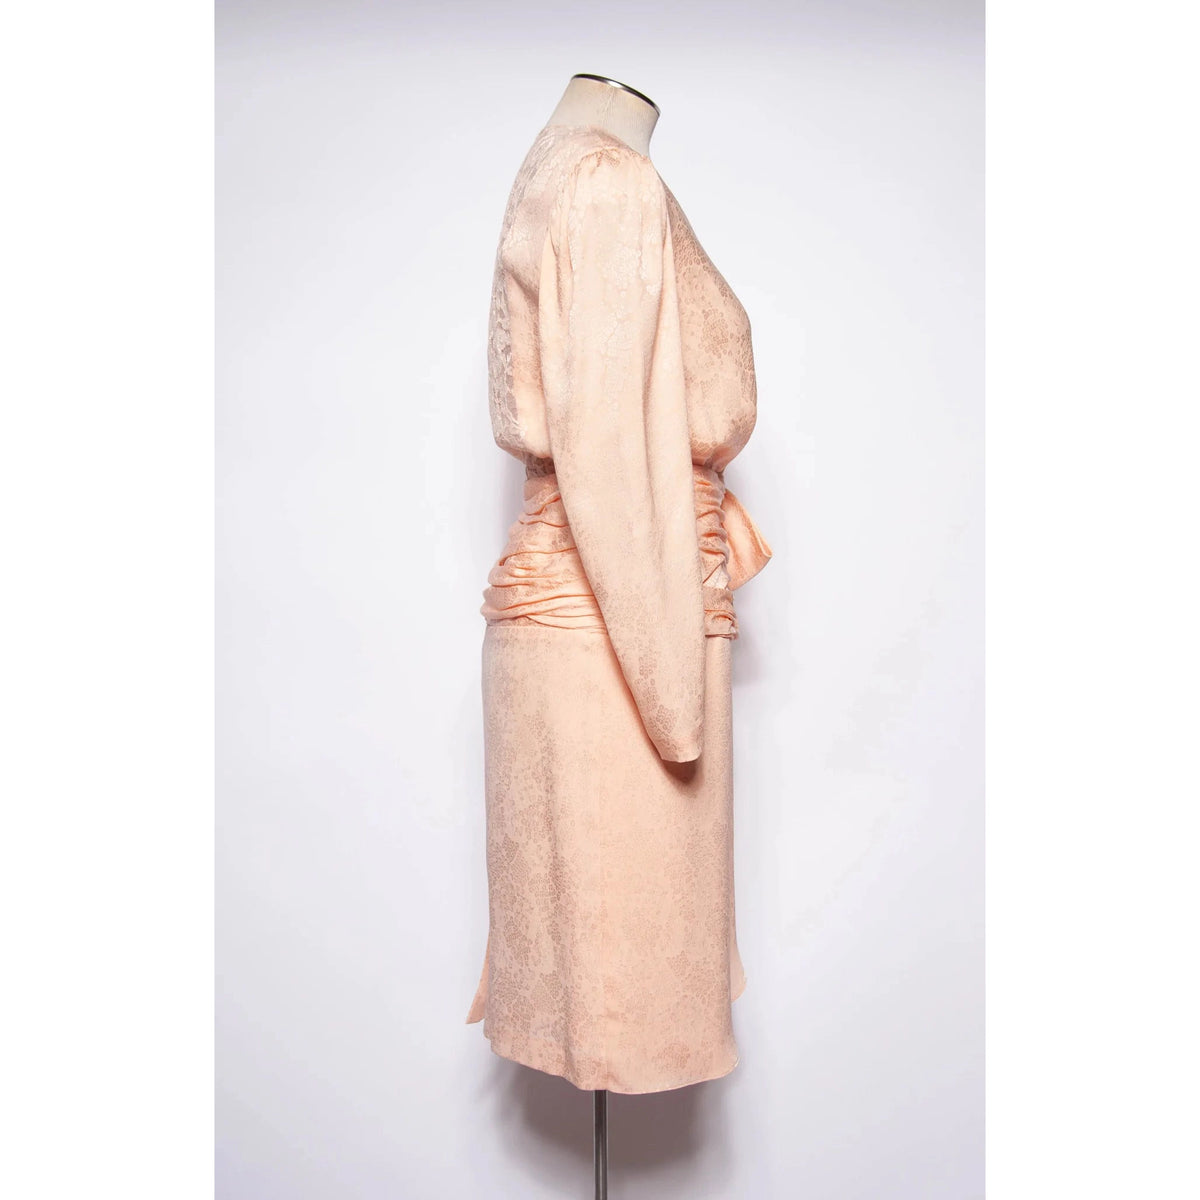 OLEG CASSINI Vintage 1980s Pink Silk and Lace Cocktail Dress | S/M - theREMODA